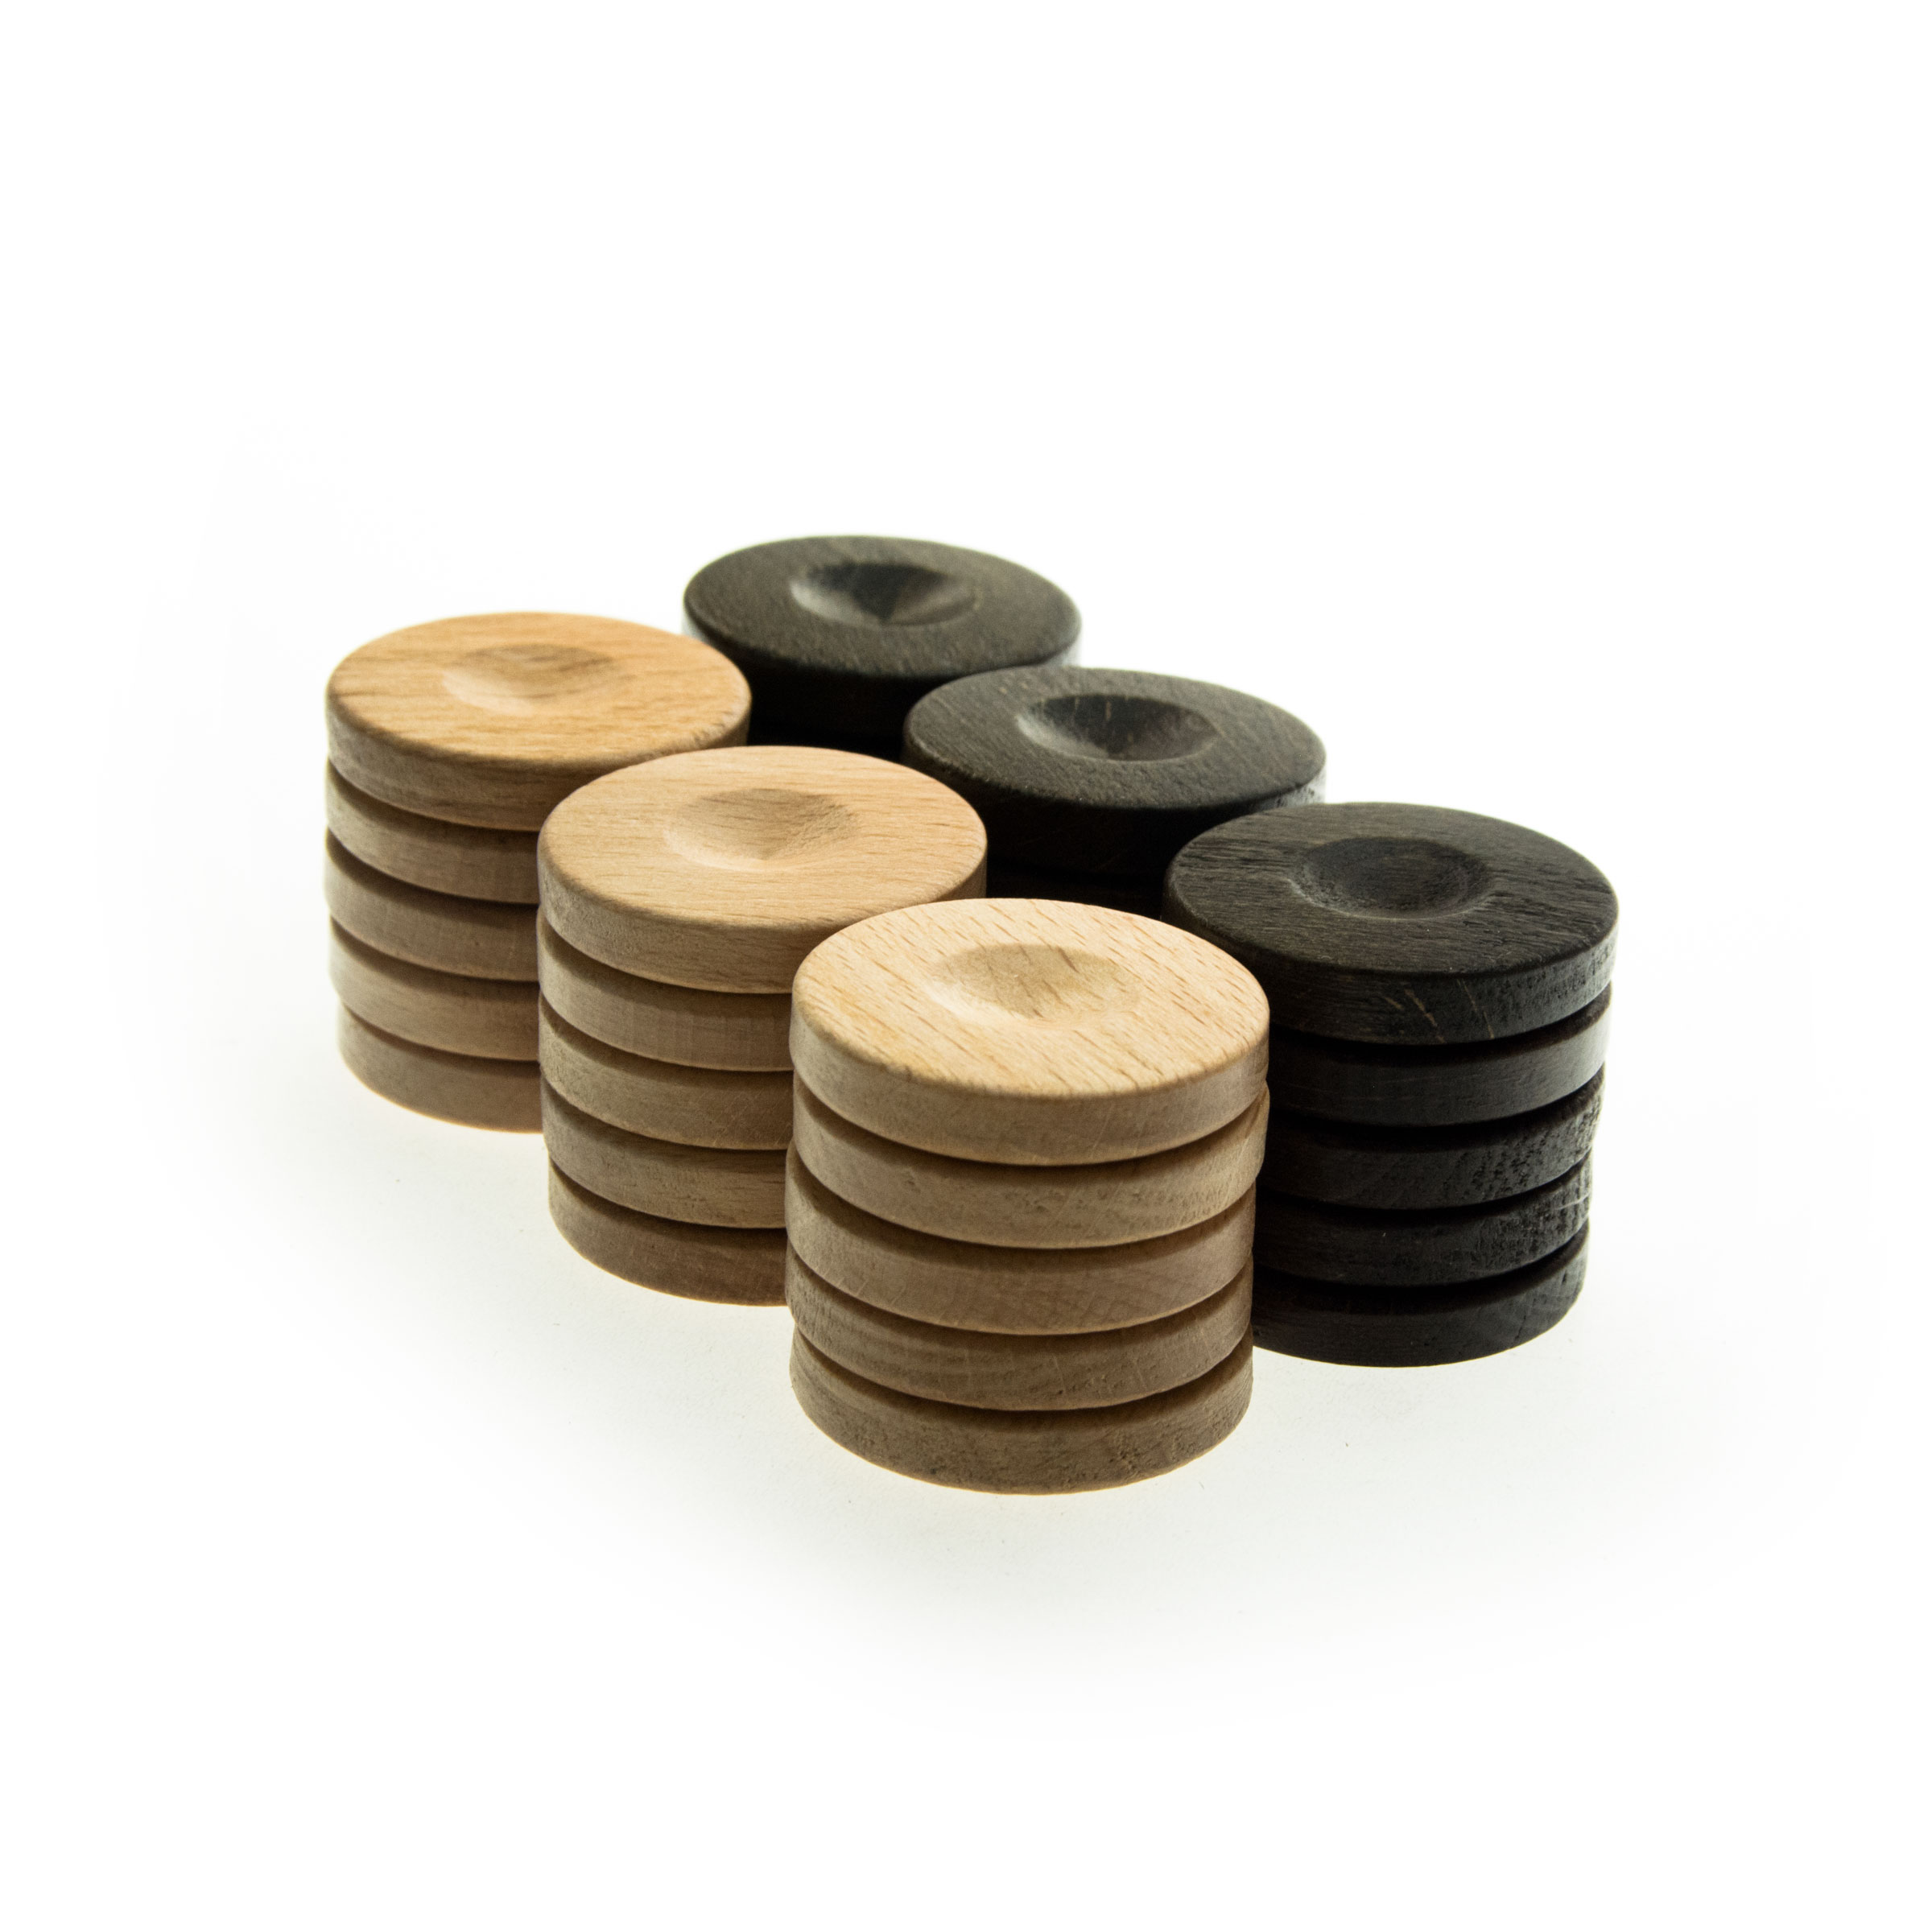 Wood Backgammon Checkers/Chips in Brown & Natural – 1 inch diameter. Backgammon chips/checkers brown and white.